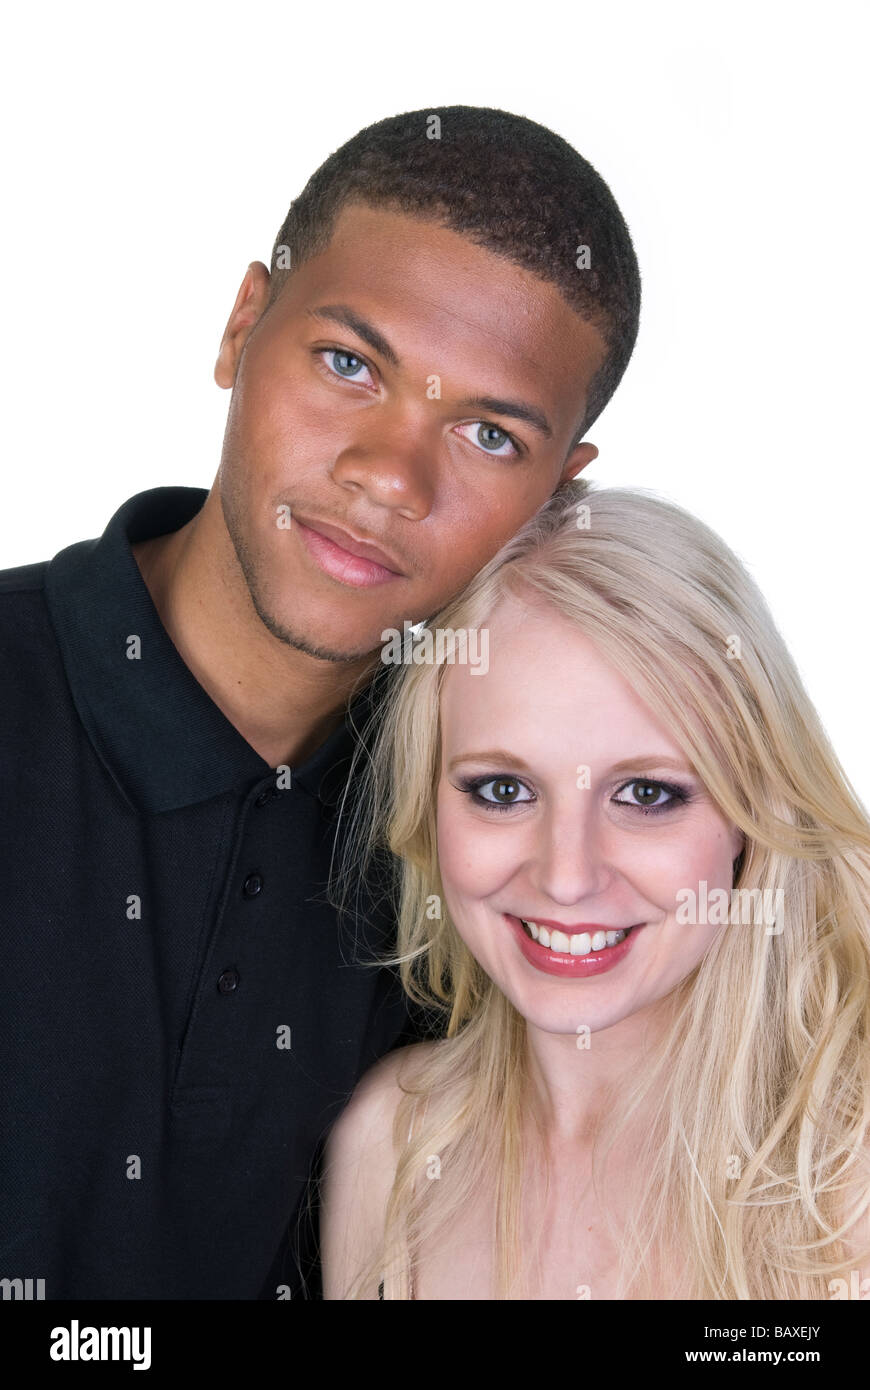 I am a girl with a white man and a black man.